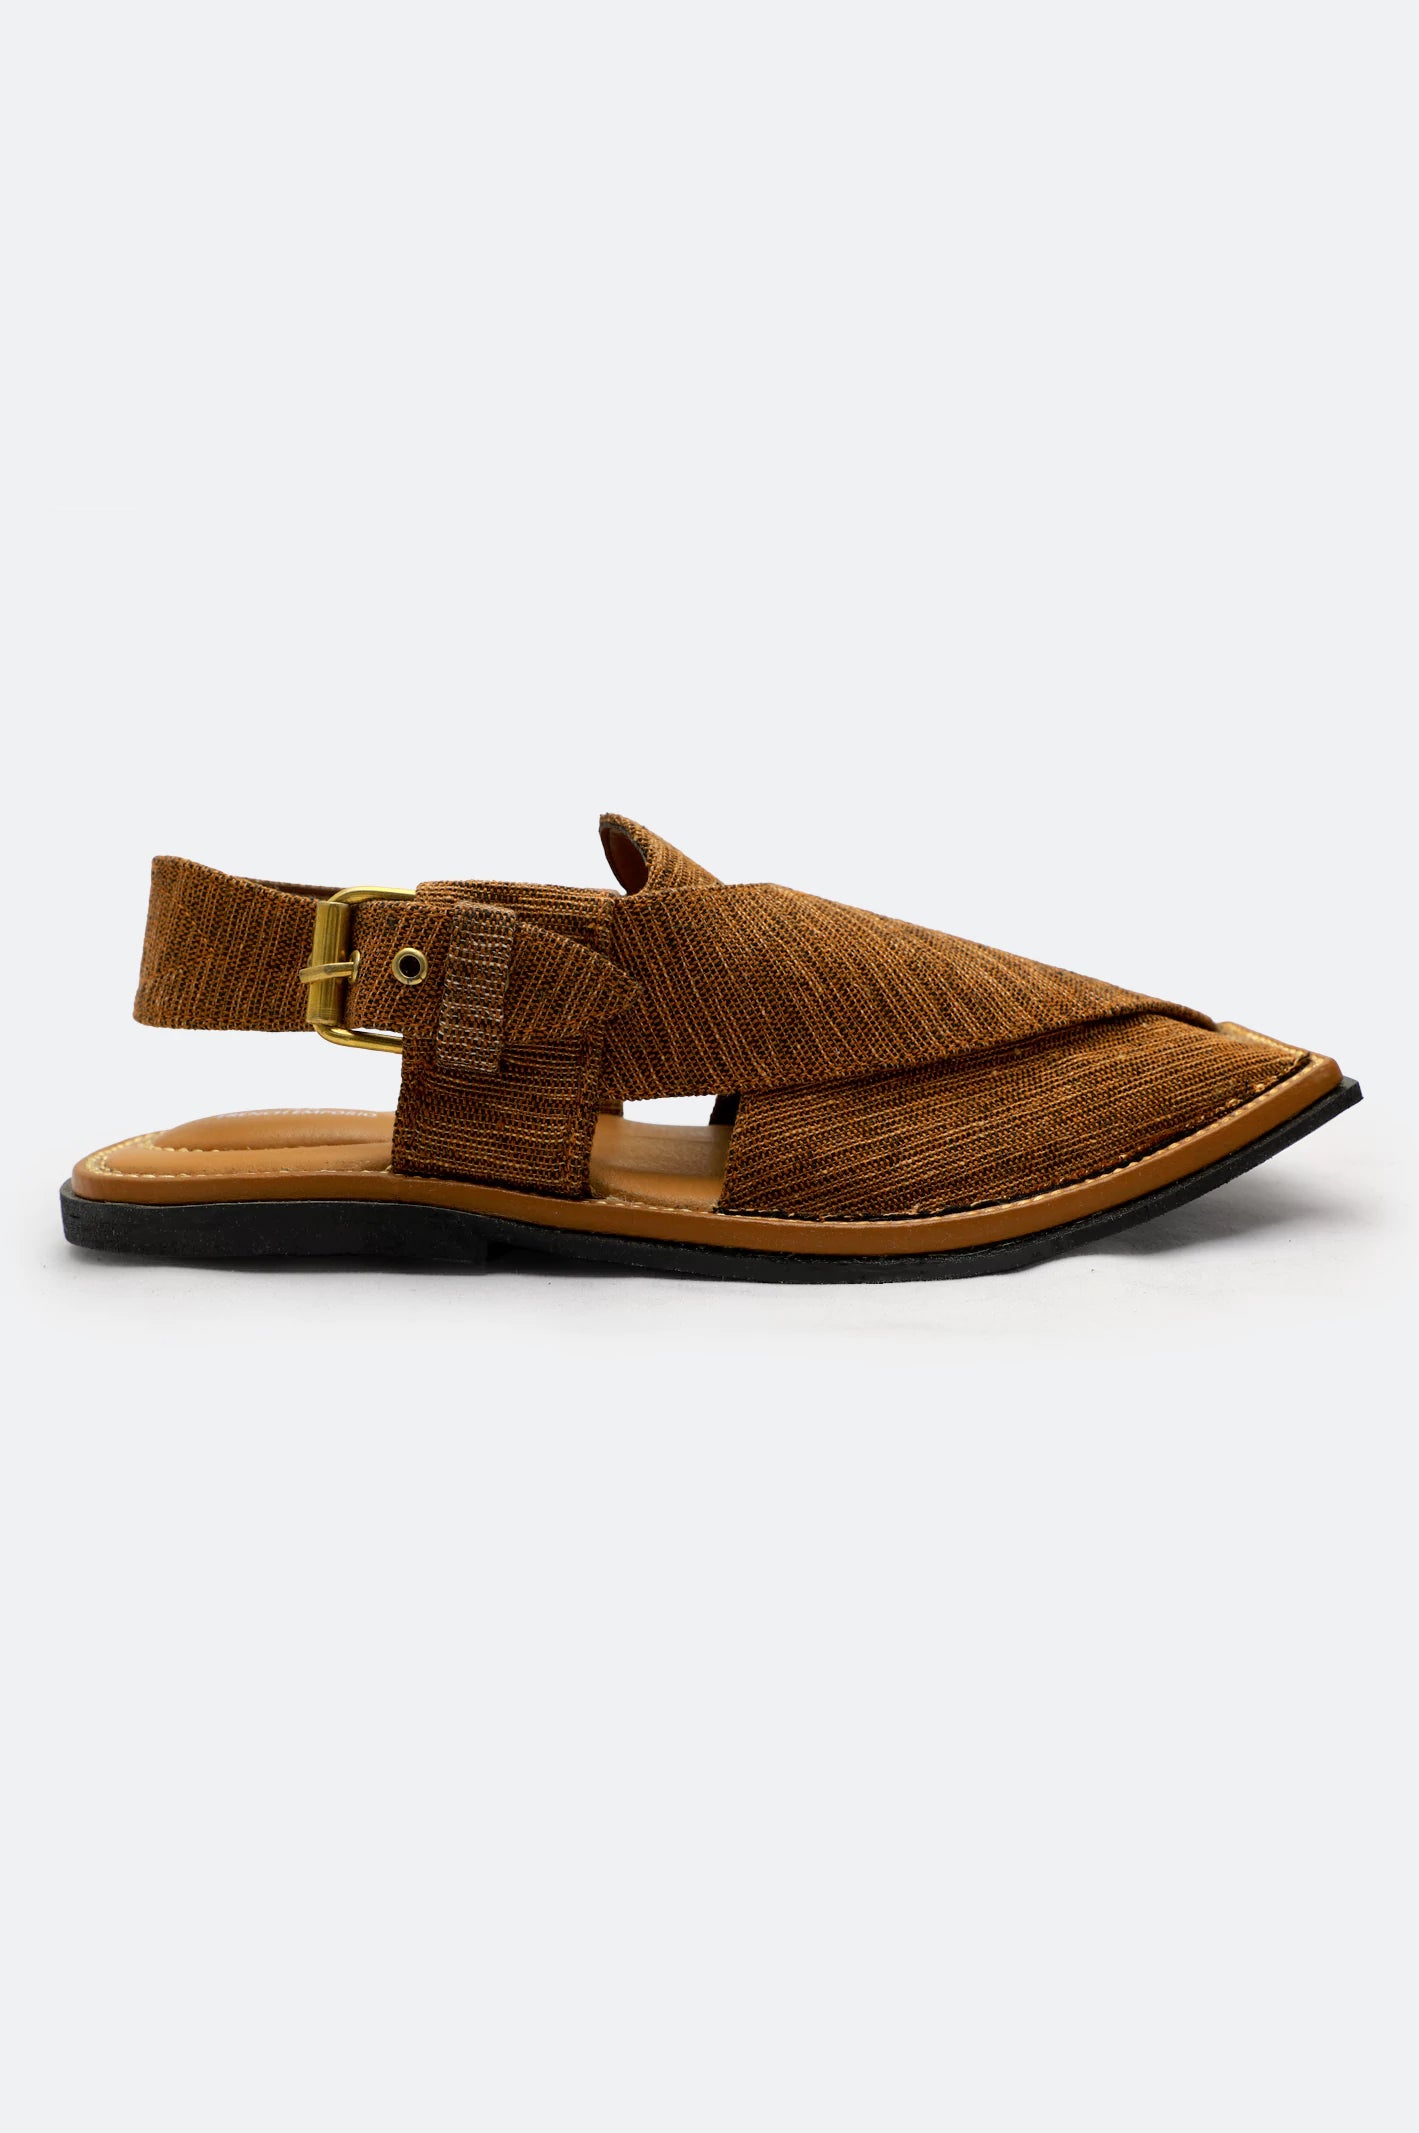 French Emporio Men's Sandals From French Emporio By Diners